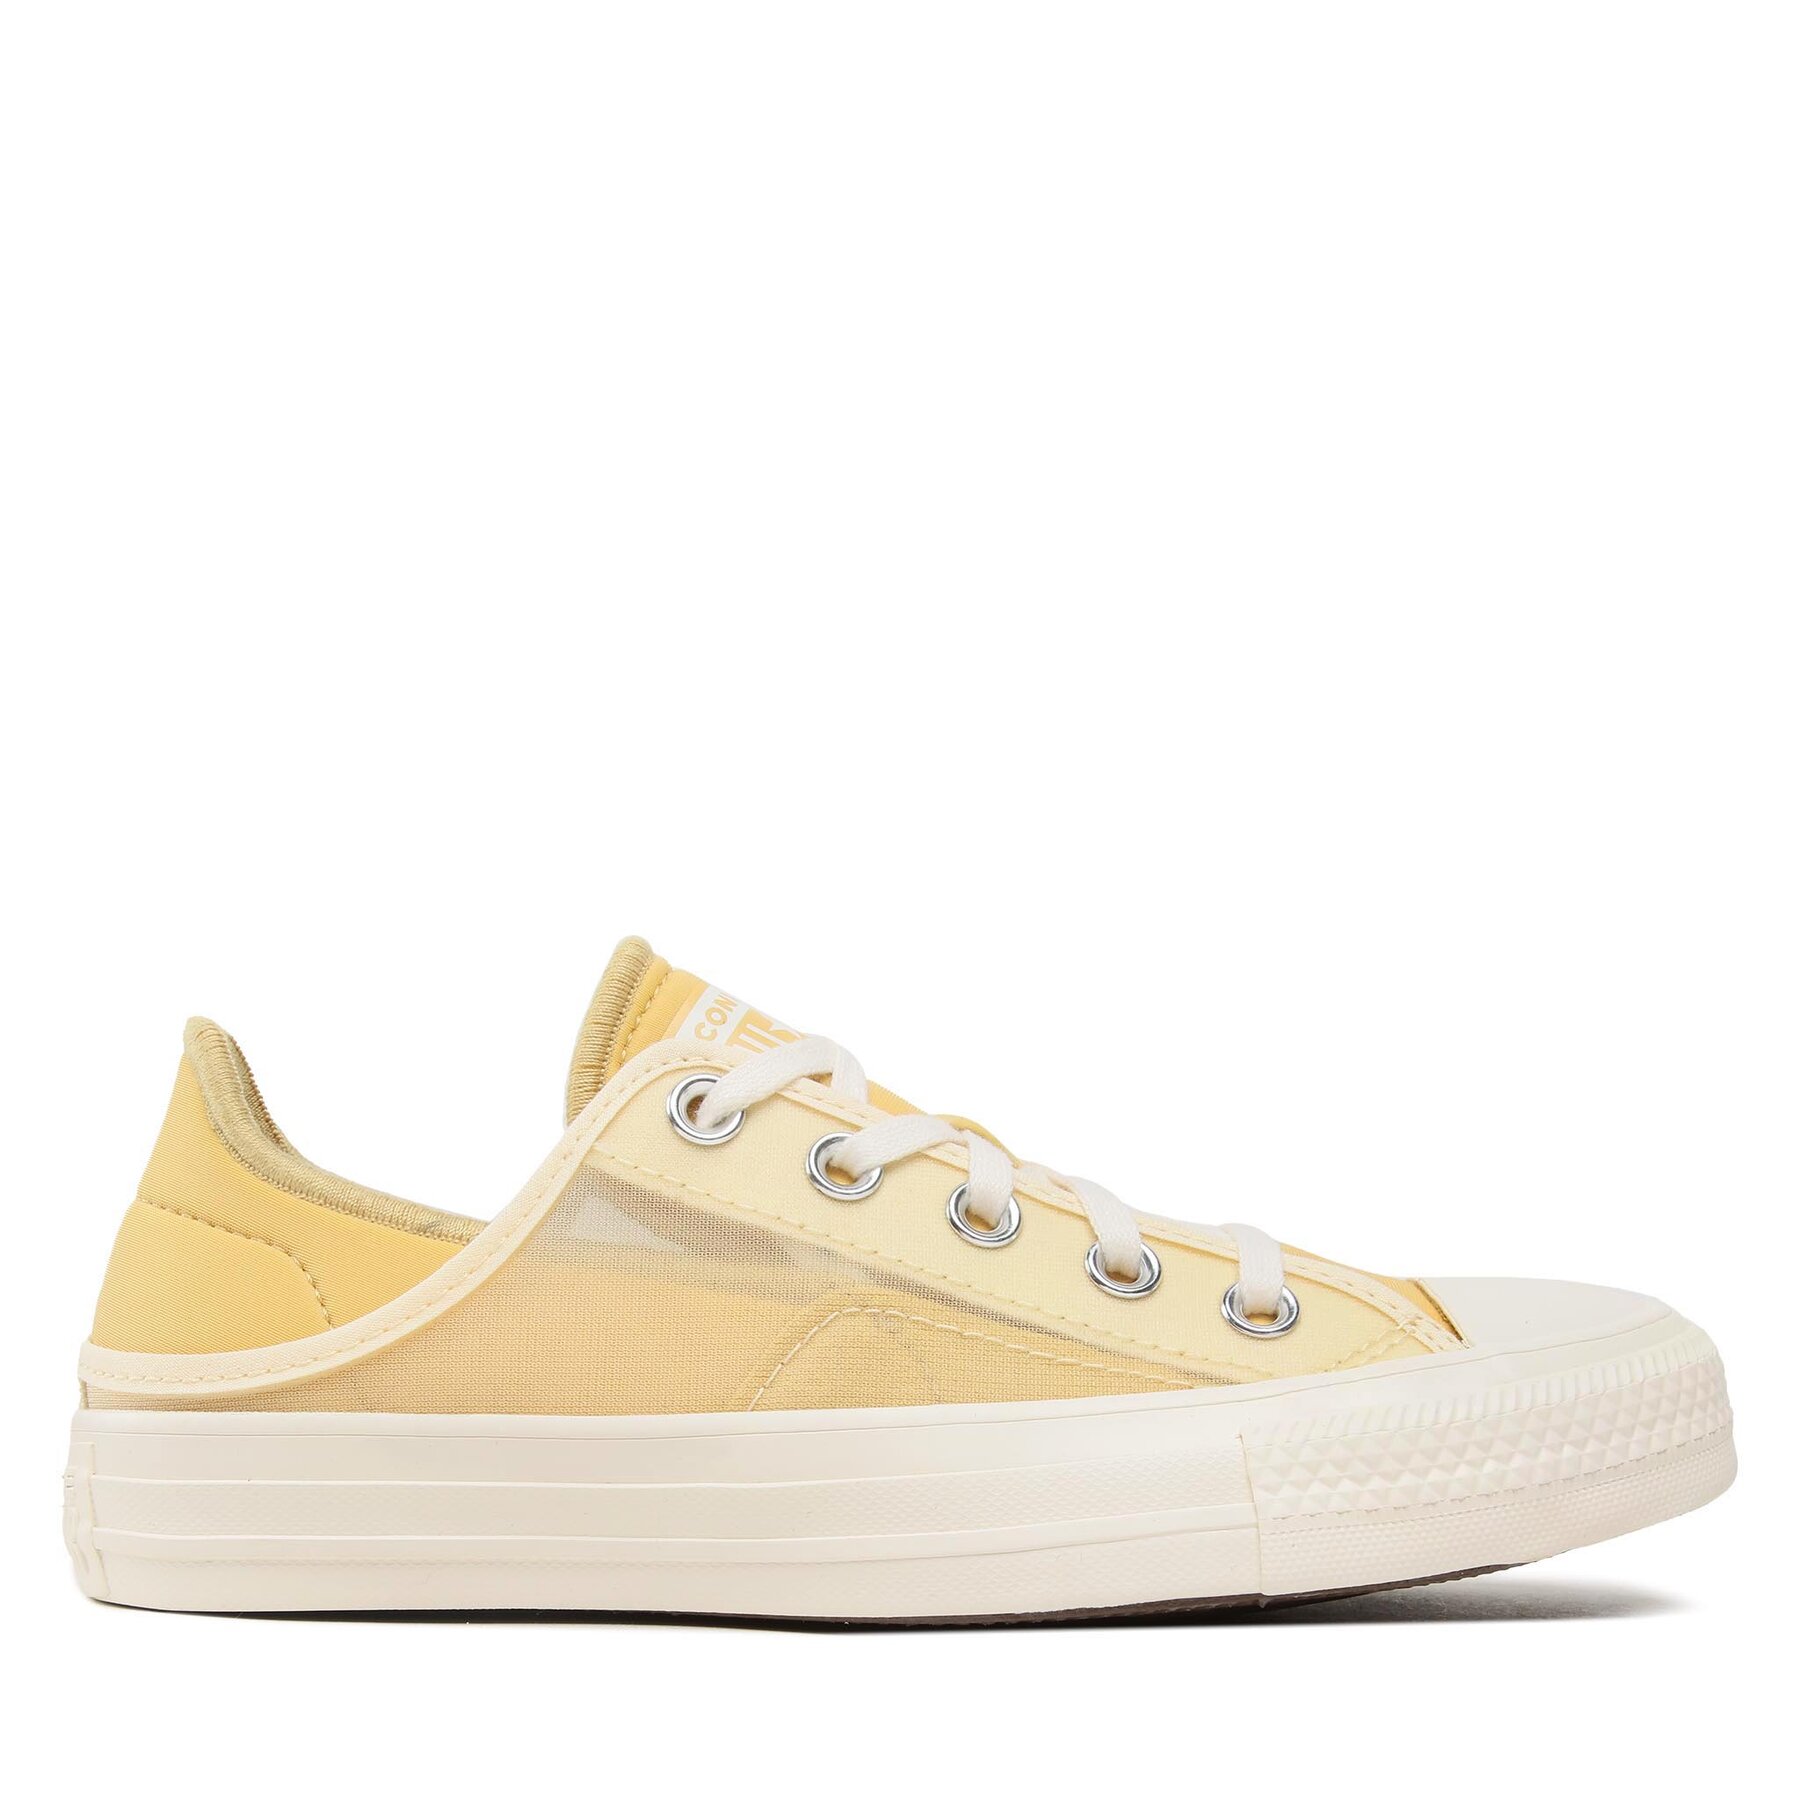 Sneakers aus Stoff Converse Chuck Taylor All Star Crush Heel A03504C White/Yellow von Converse